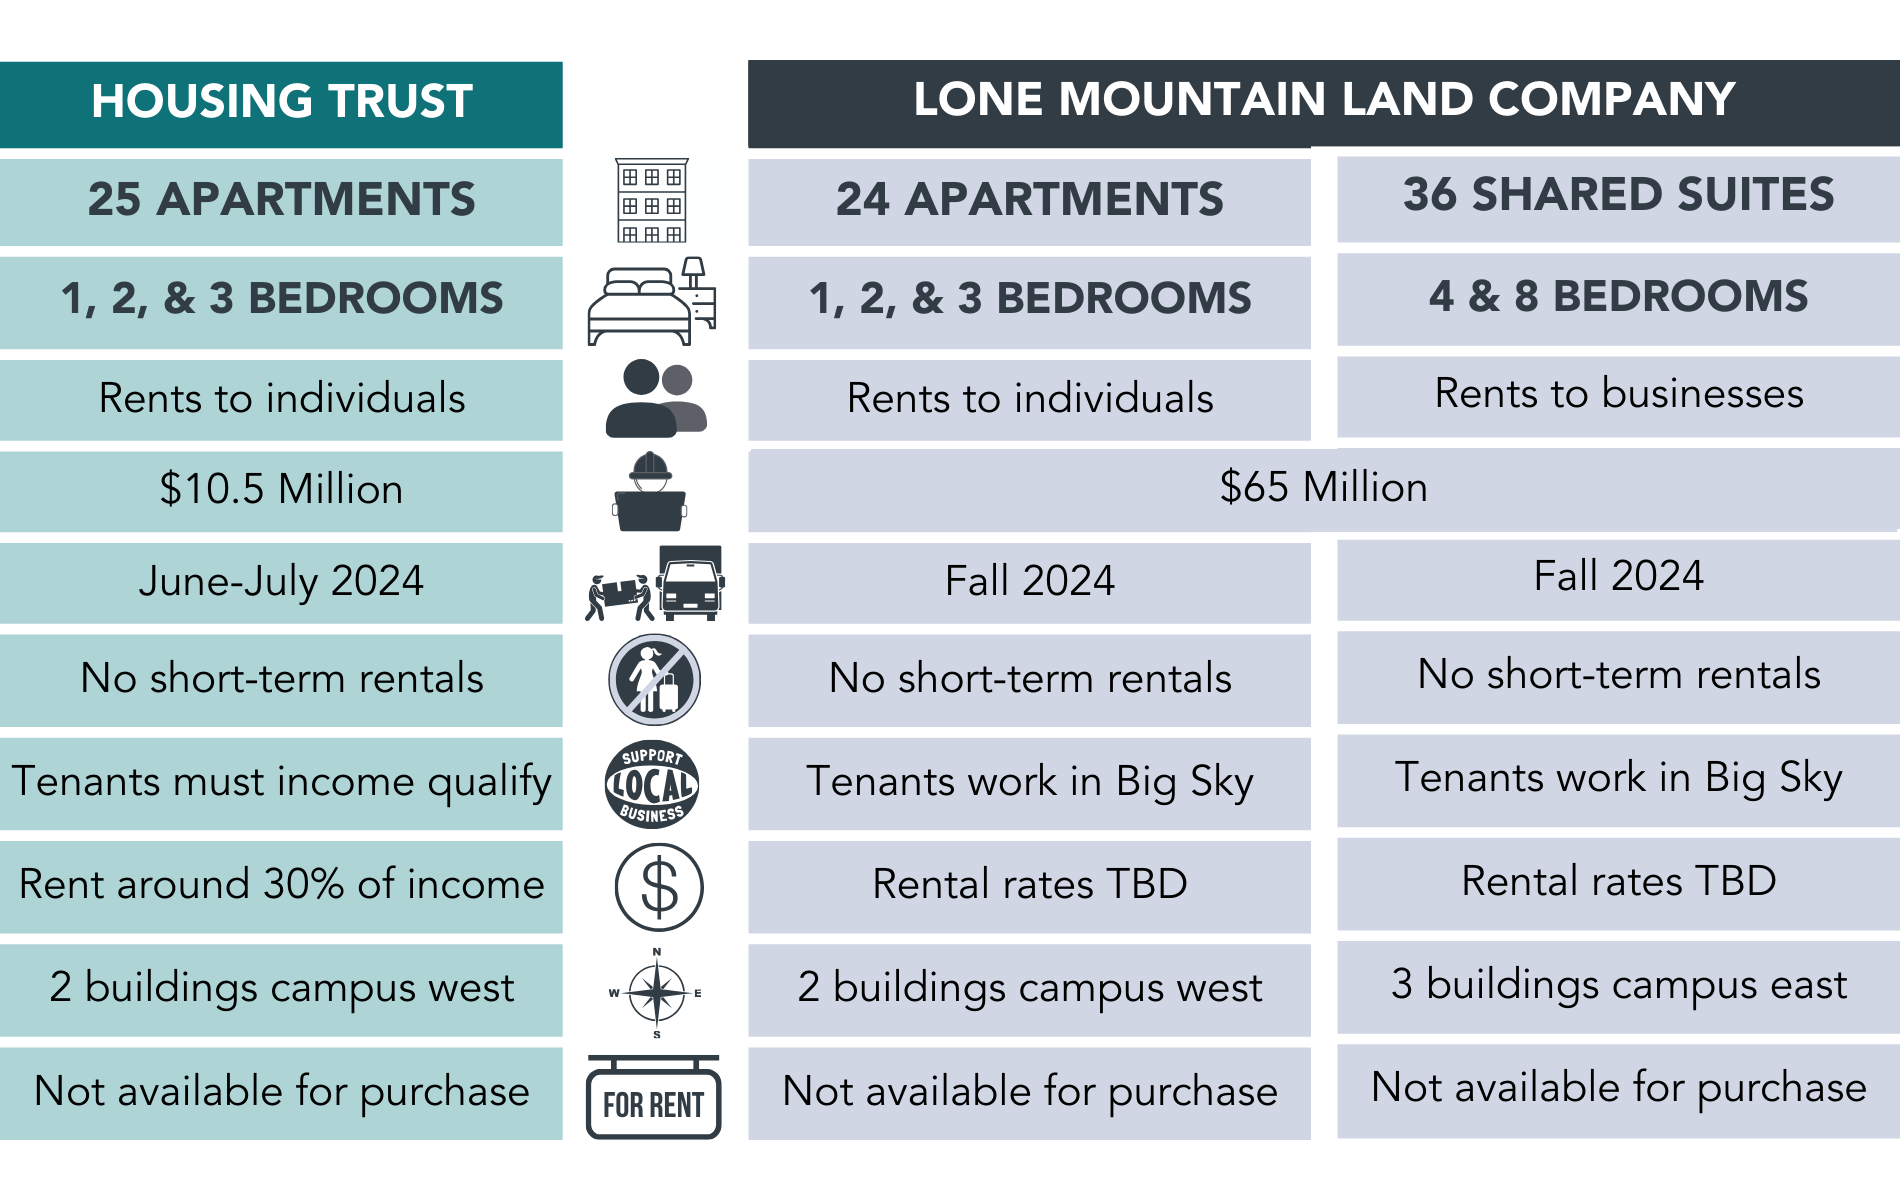 An image of a comparison chart between the Housing Trust and LMLC's portions of Riverview Apartments.